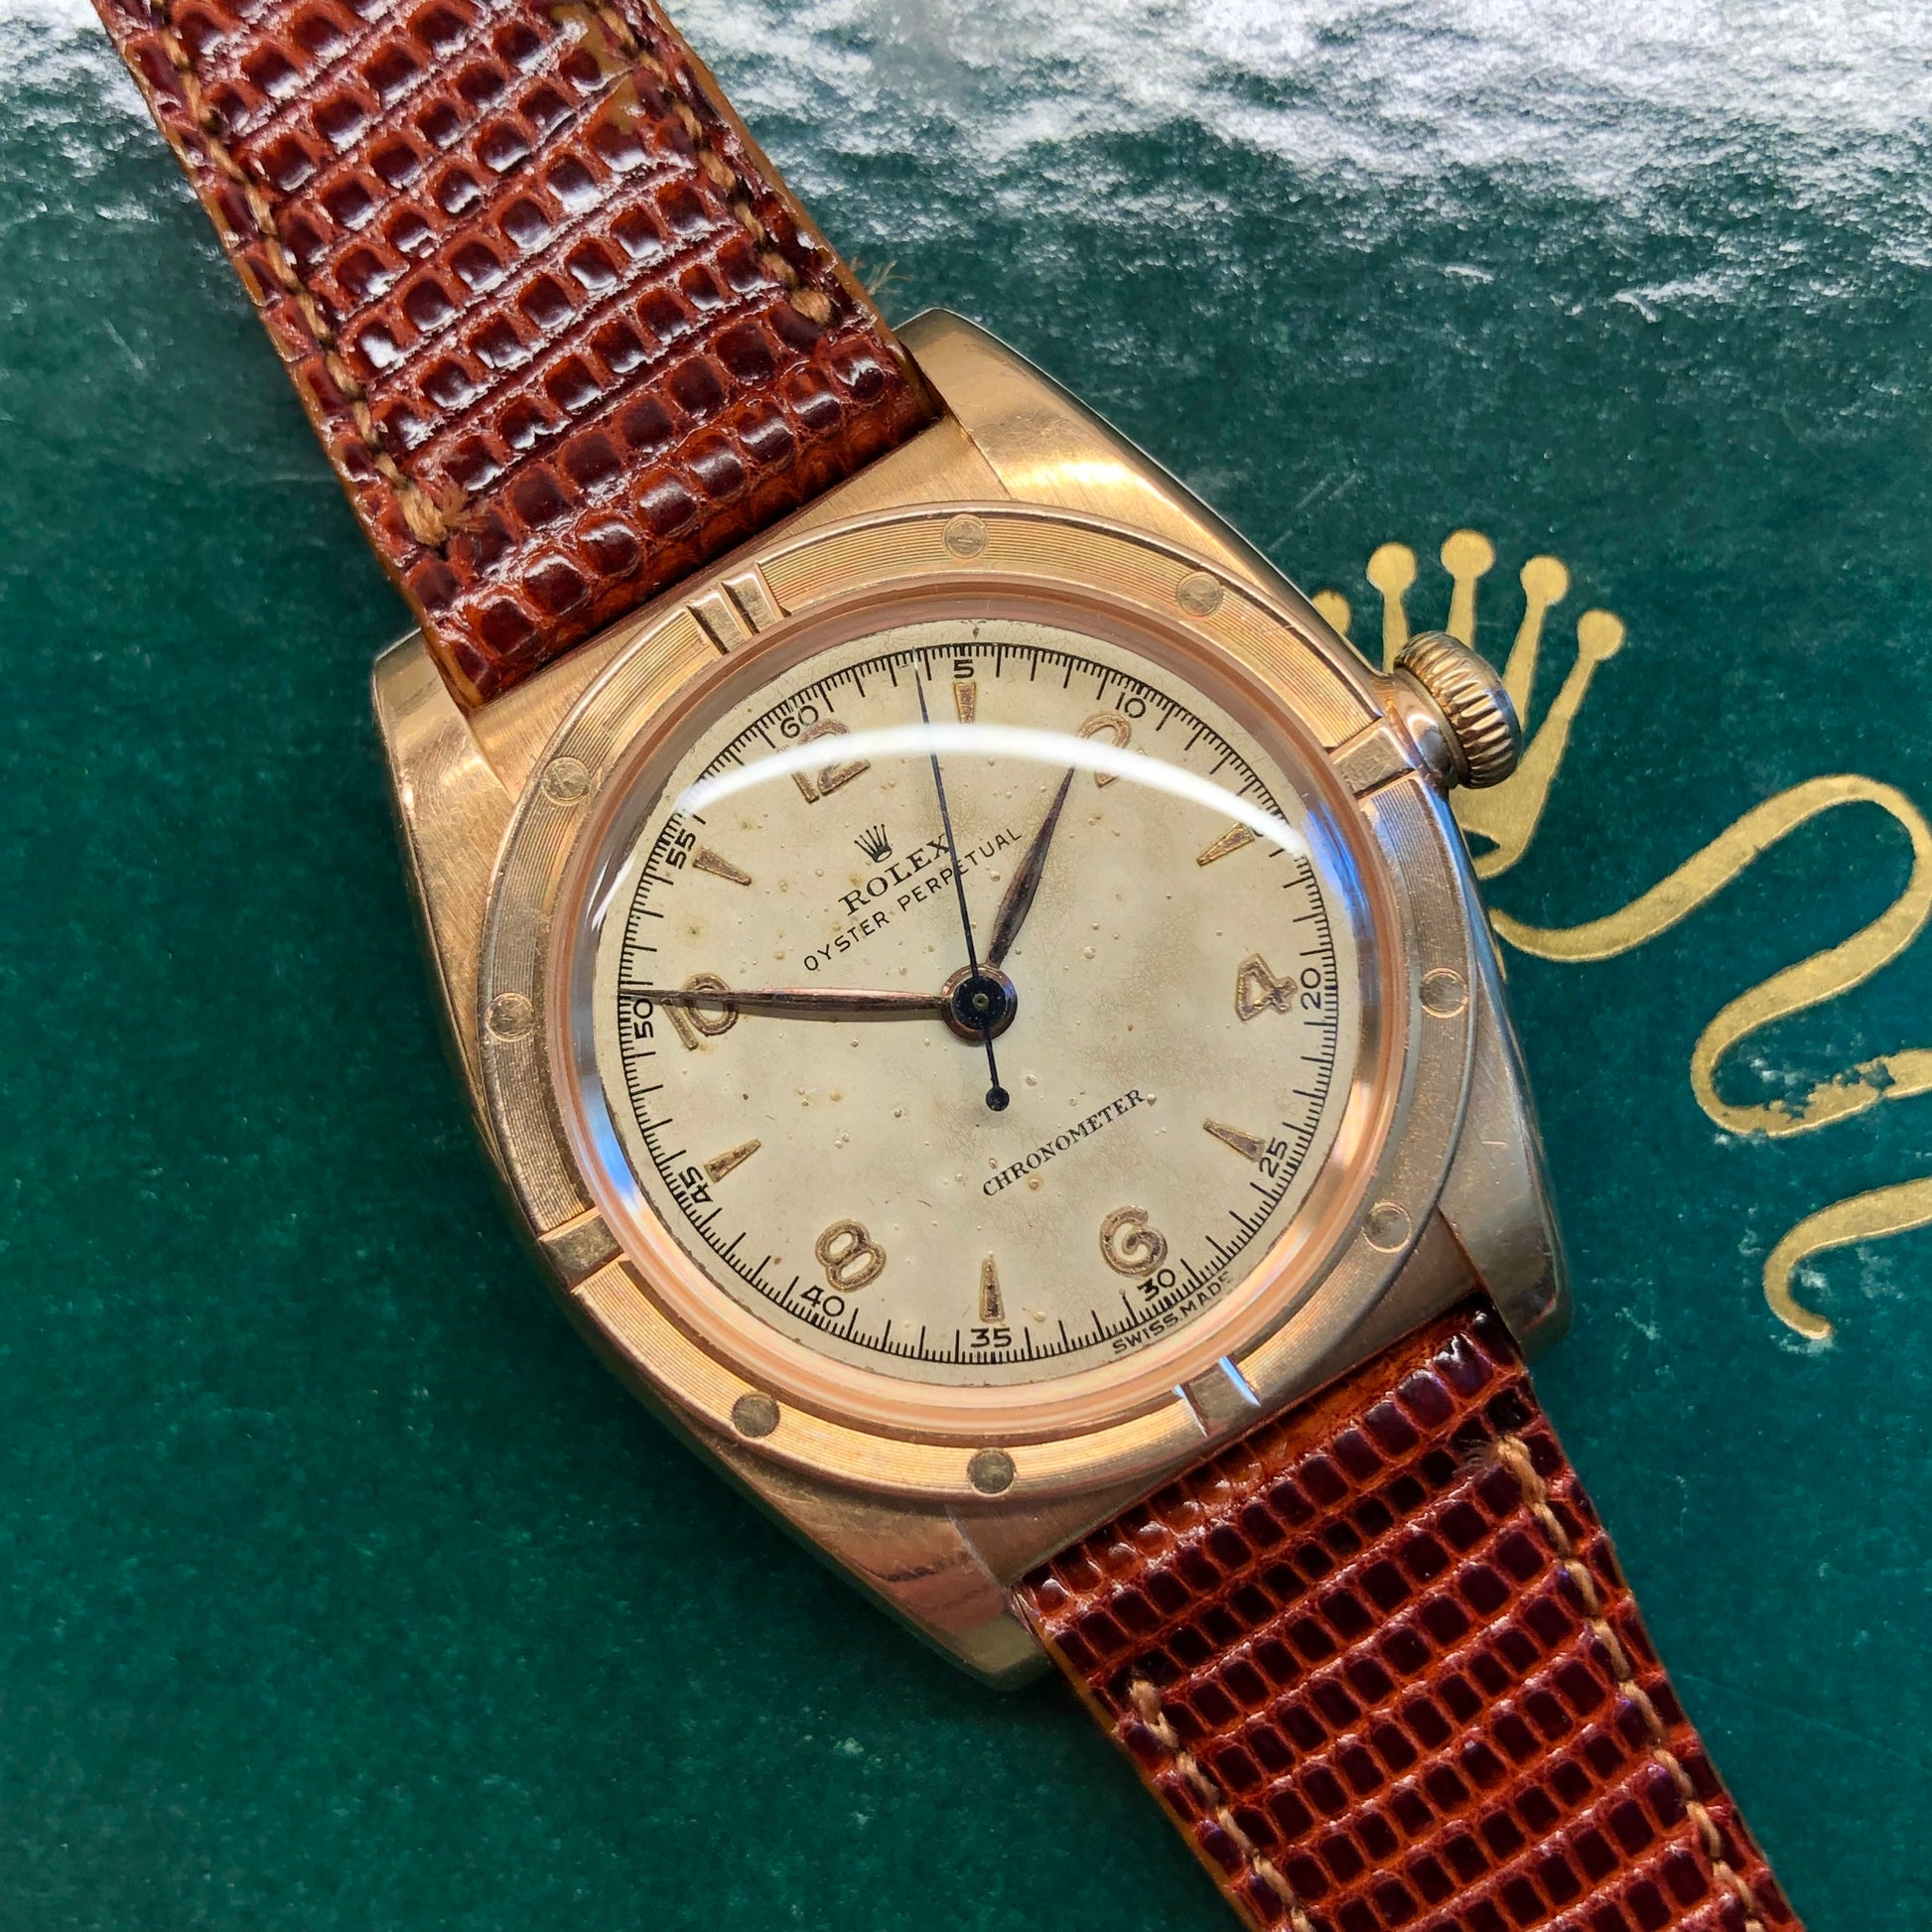 1946 Rolex Oyster Perpetual Bubbleback 3372 Chronometer 14K Rose Gold Automatic Wristwatch - Hashtag Watch Company